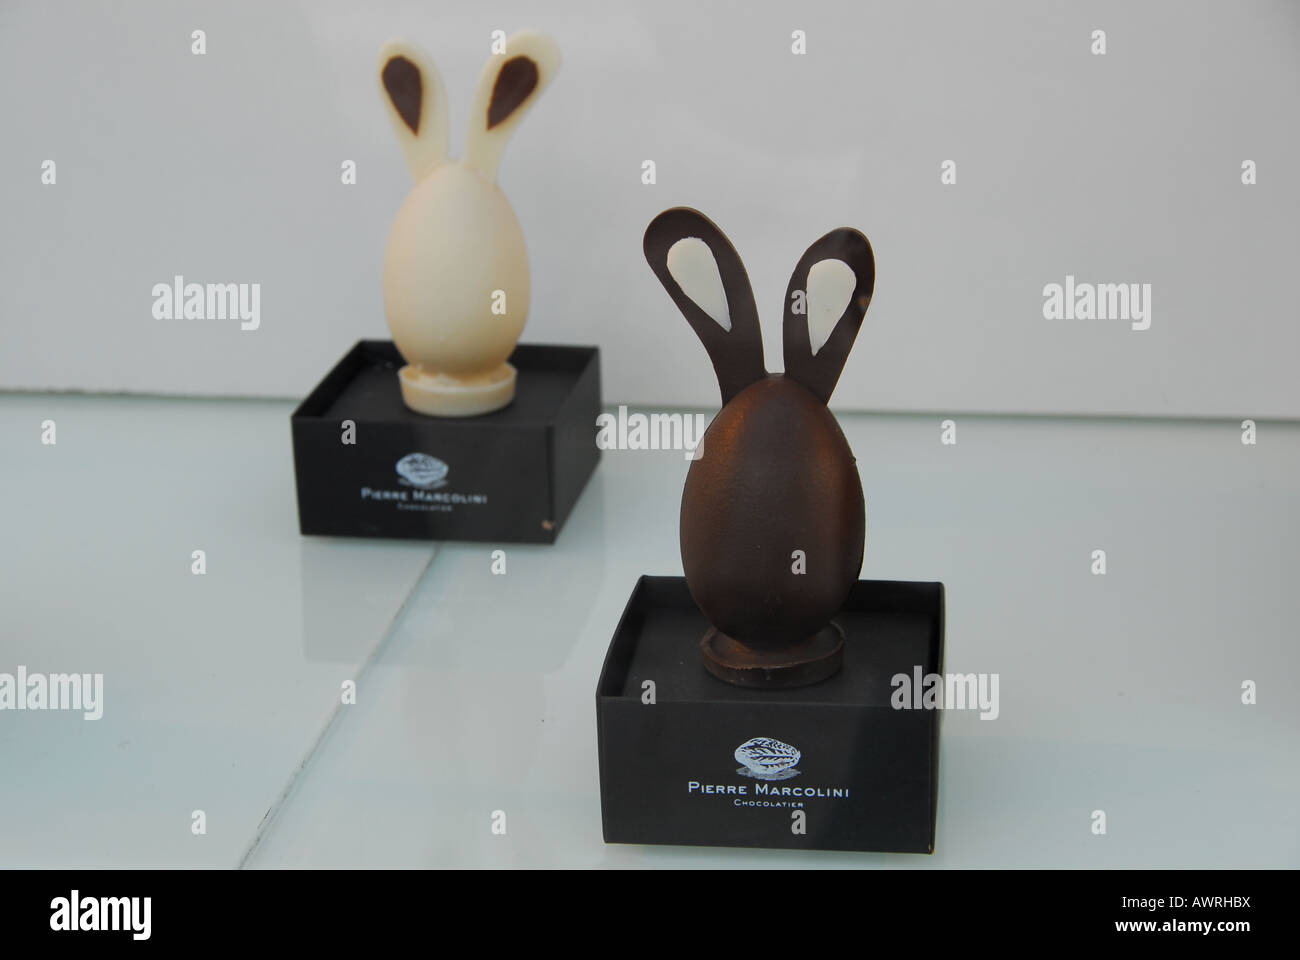 Chocolate Easter bunnies in the window of Pierre Marcolini's Stock Photo